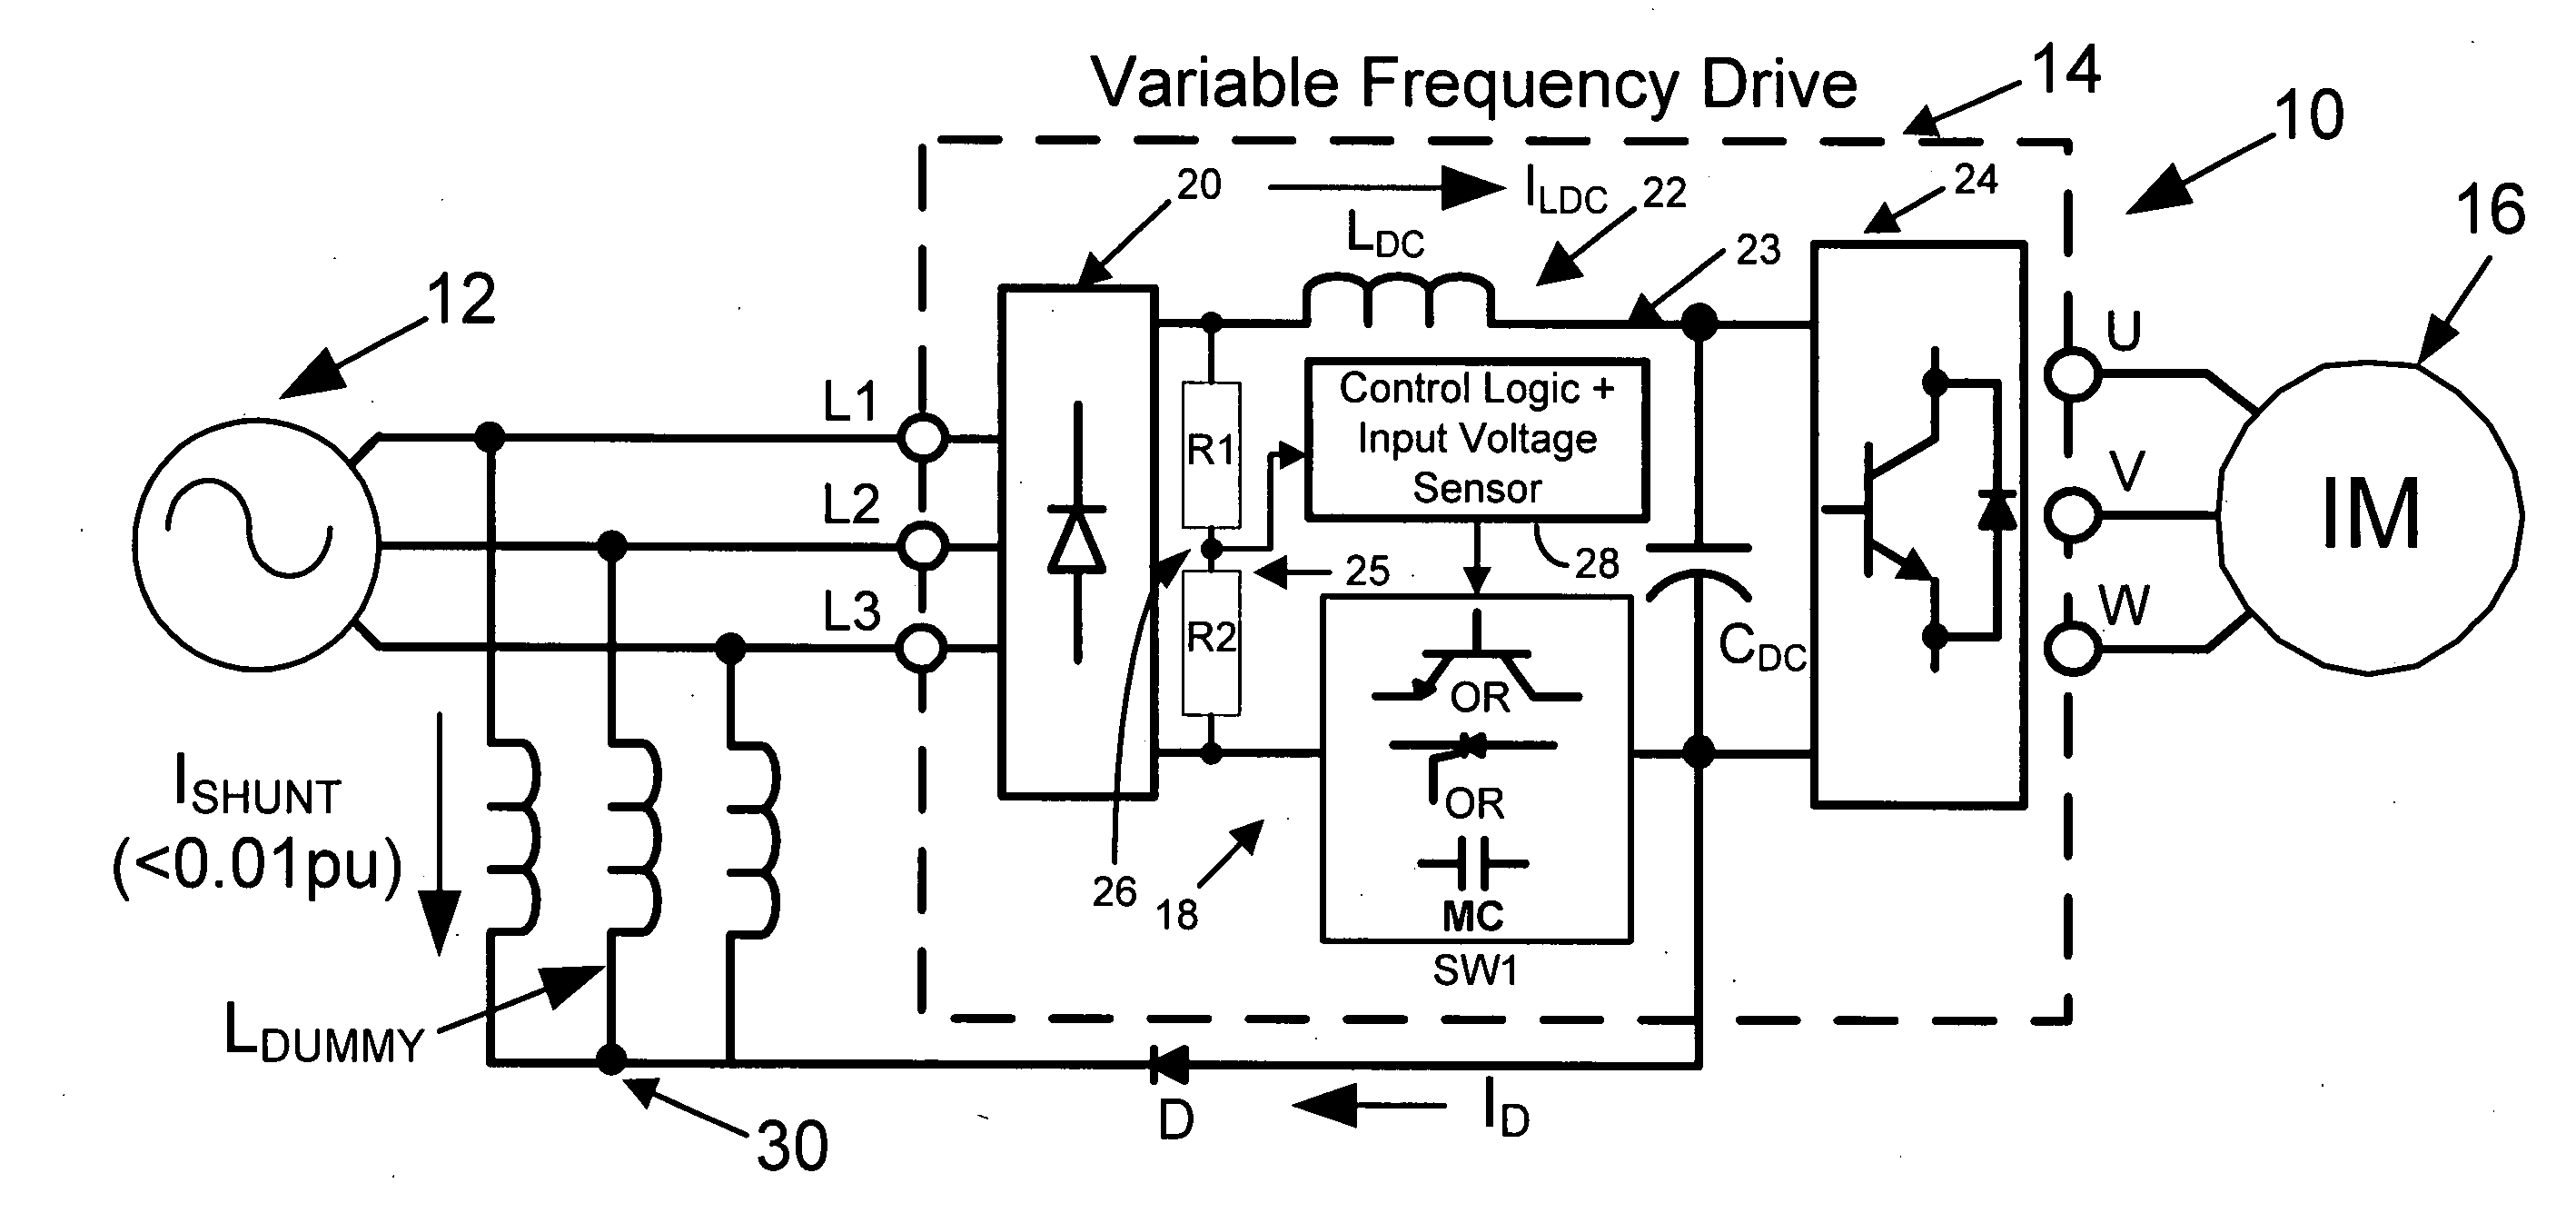 Low stress soft charge circuit for diode front end variable frequency drive